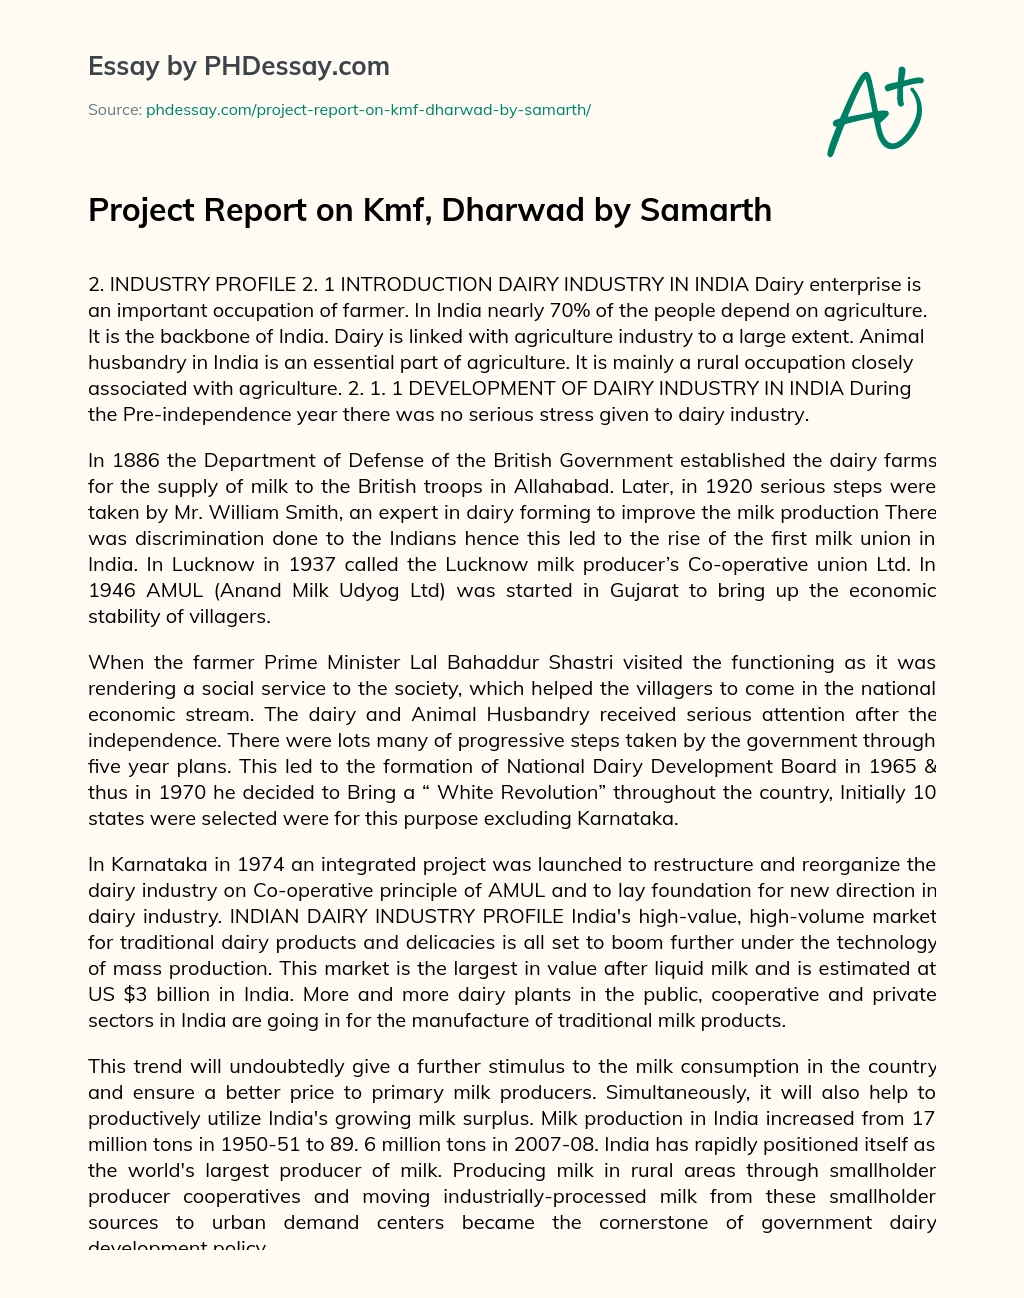 Project Report on Kmf, Dharwad by Samarth essay